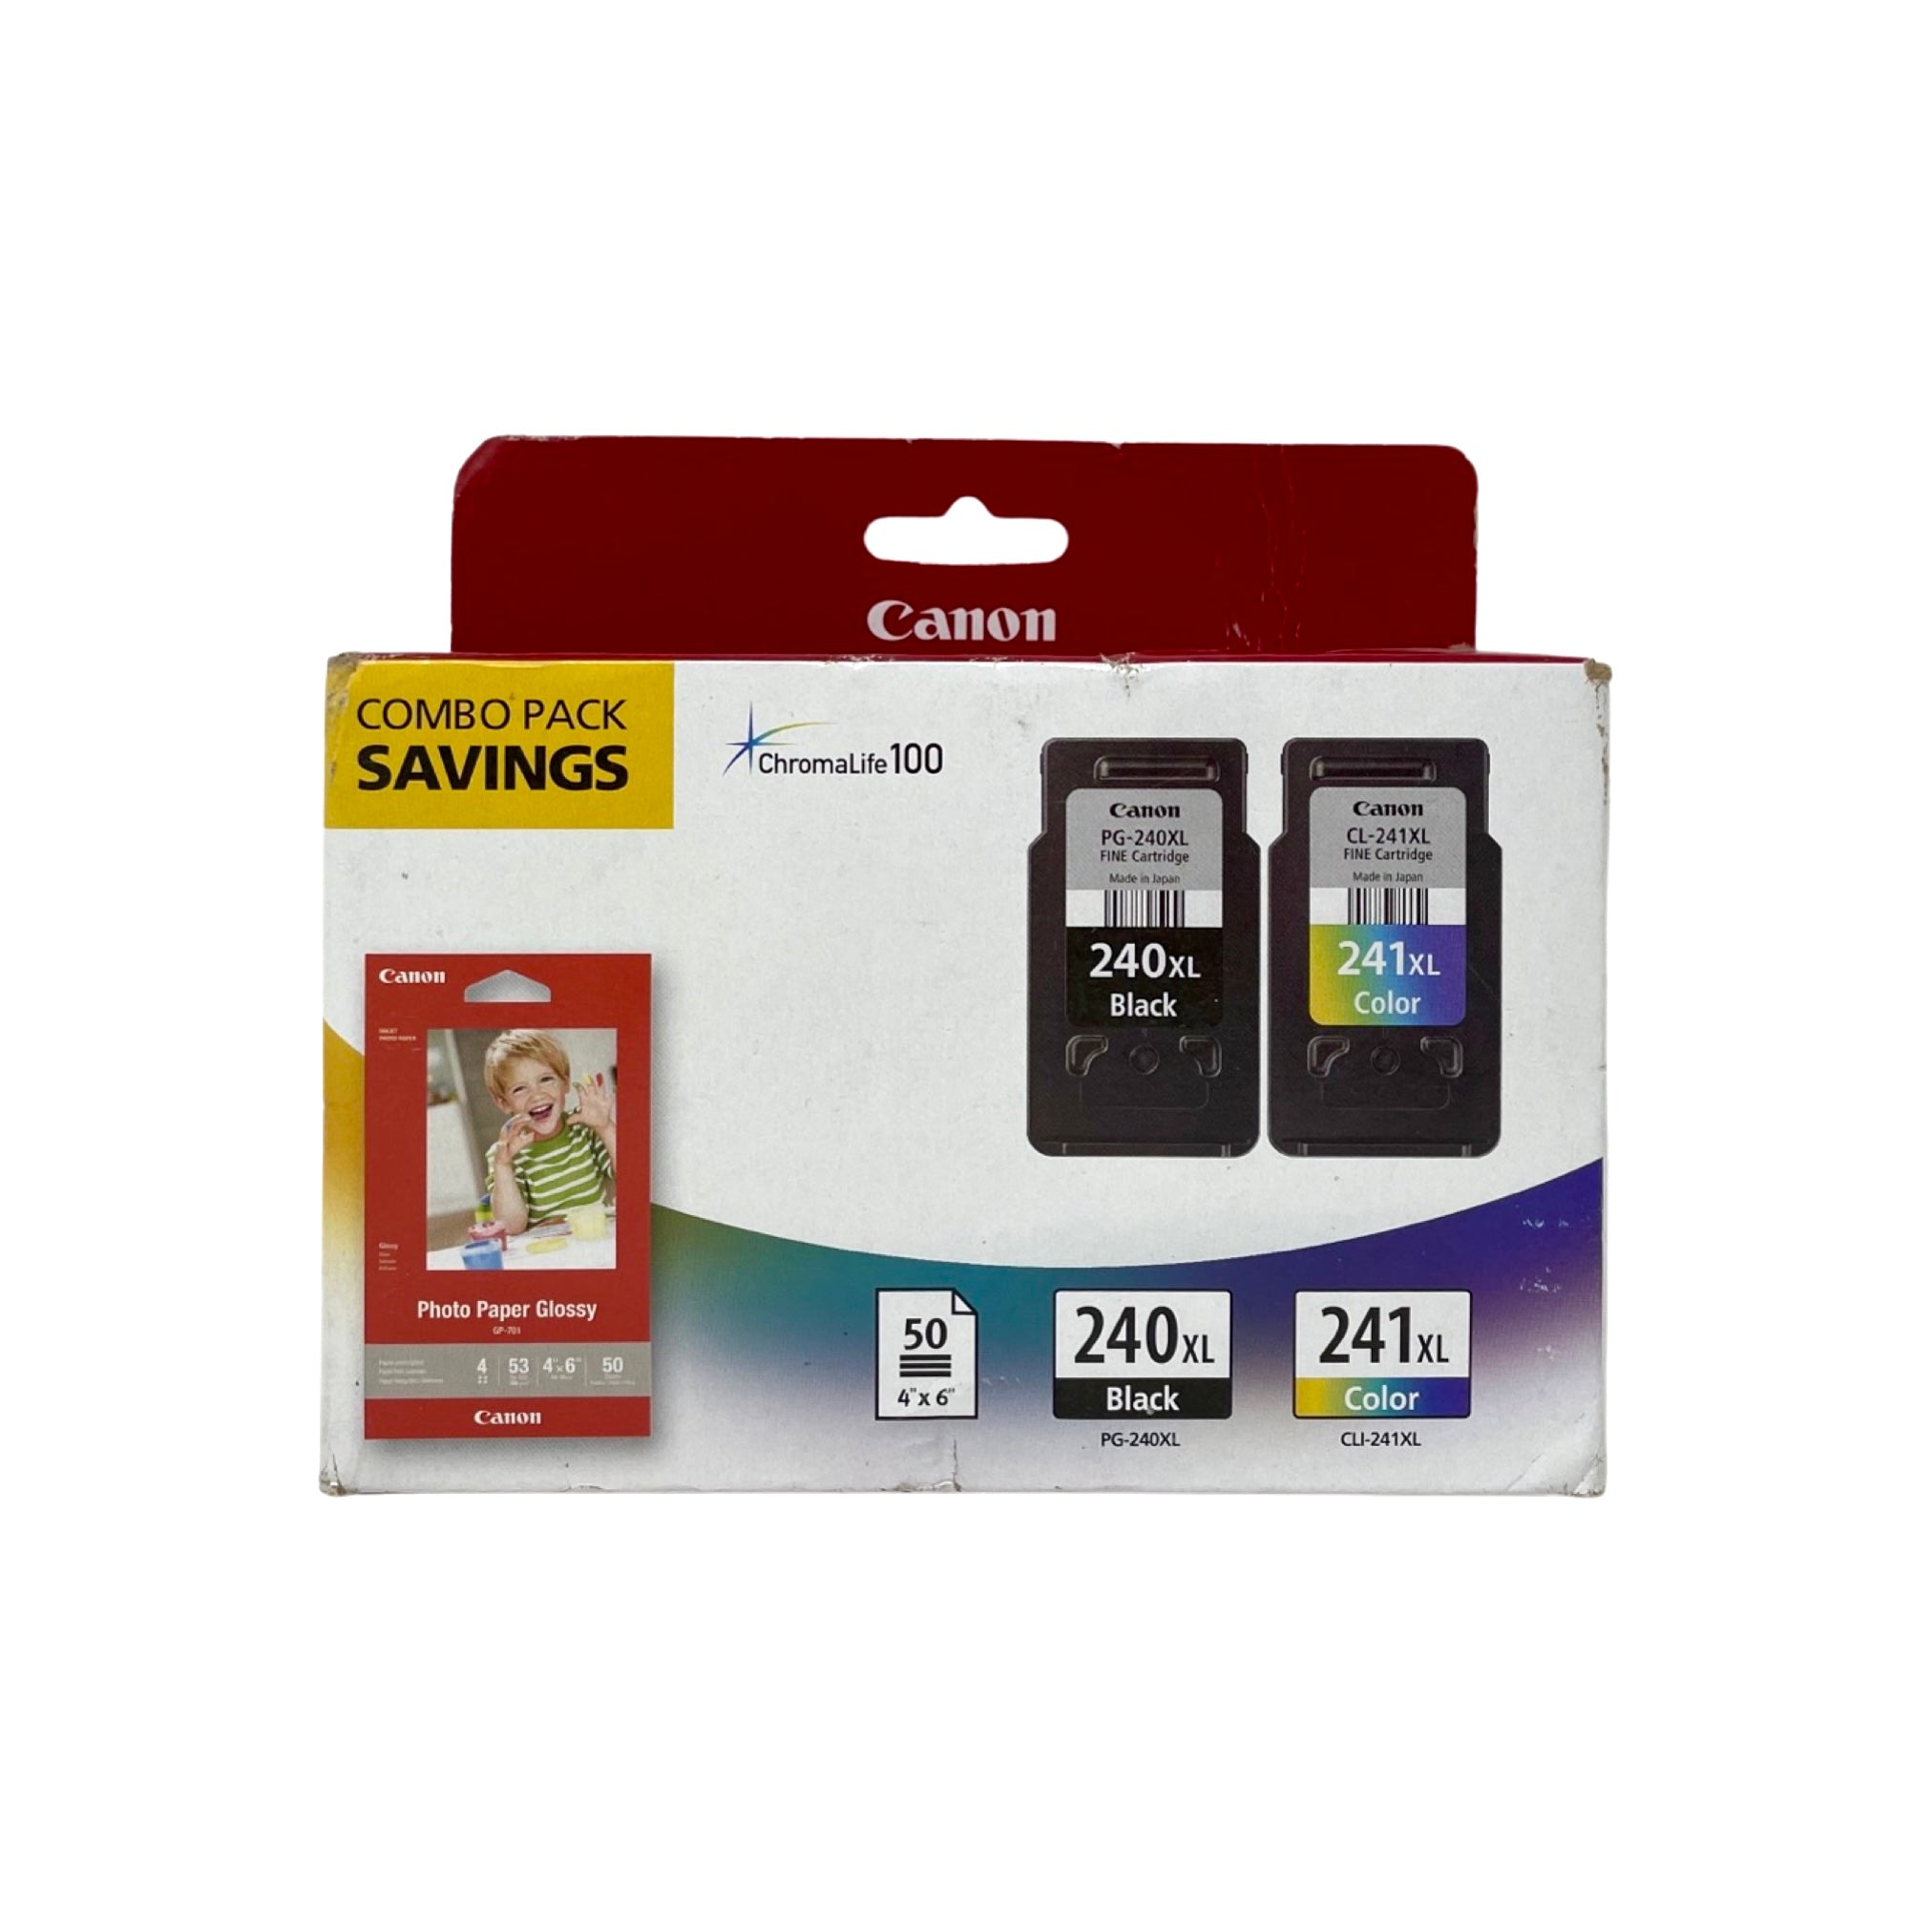 Genuine Canon PG 240XL / CL 241XL Combo Black/Color Ink Cartridges, High Yield, 2/Pack with photo glossy paper (5206B005)